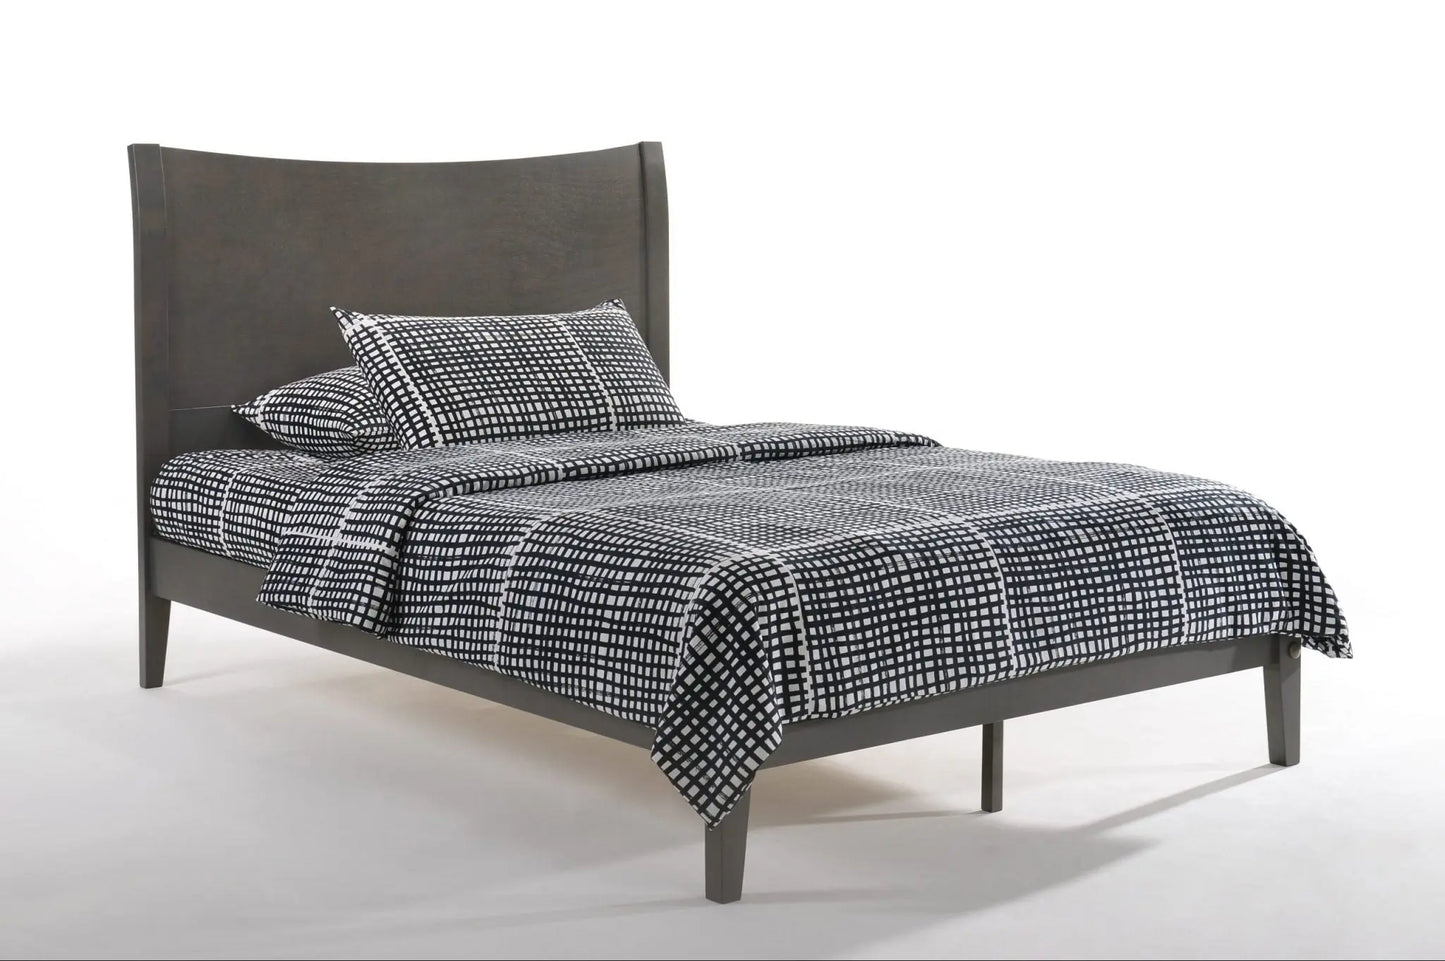 BLACKPEPPER BED night and day furniture